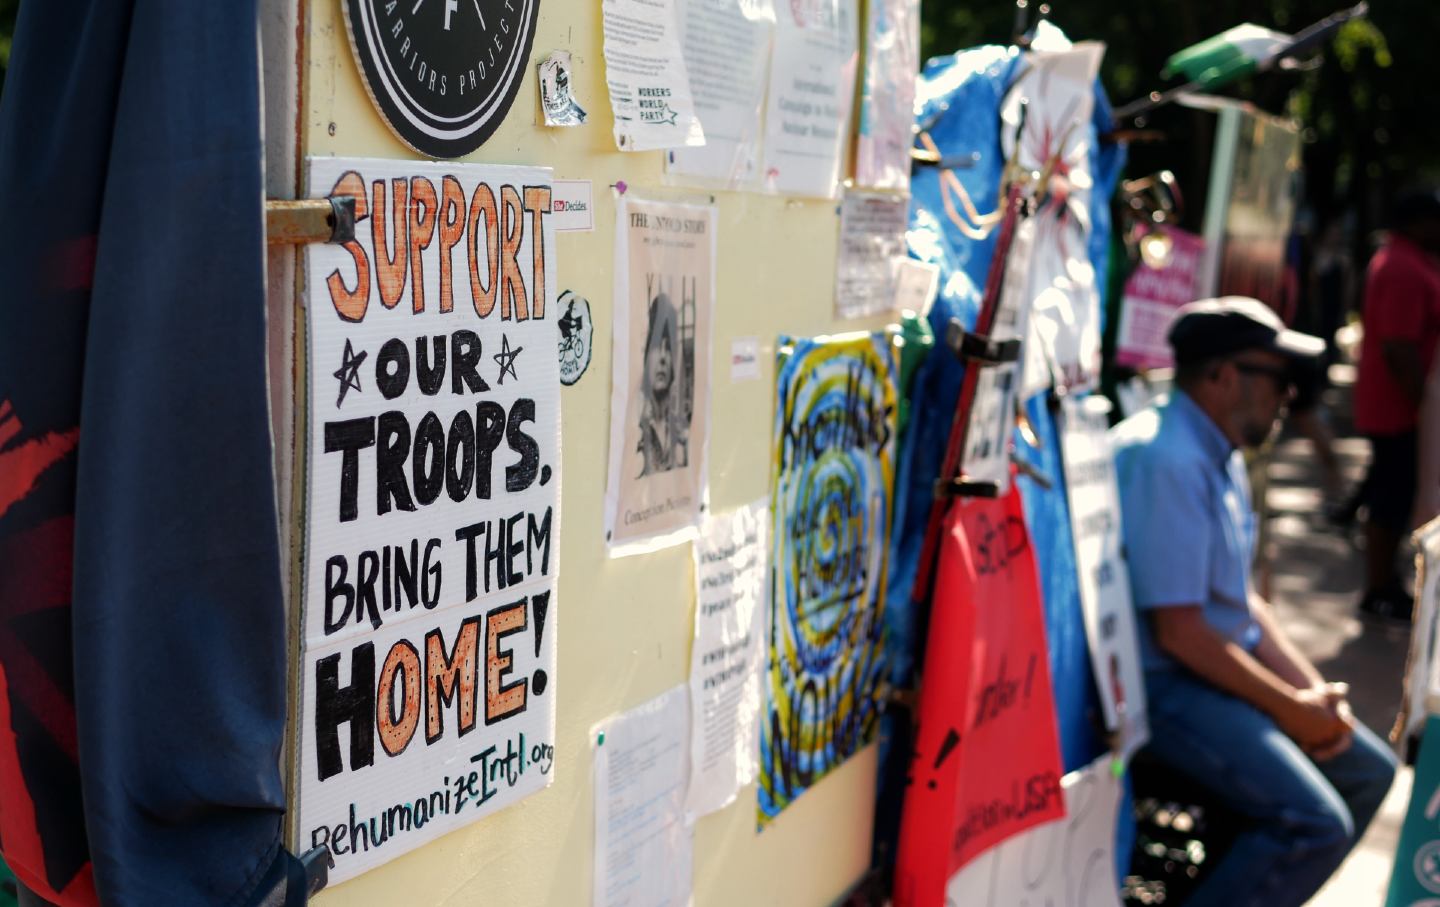 A sign supporting the return of military troops from wars abroad is displayed in front of the White House in 2018.